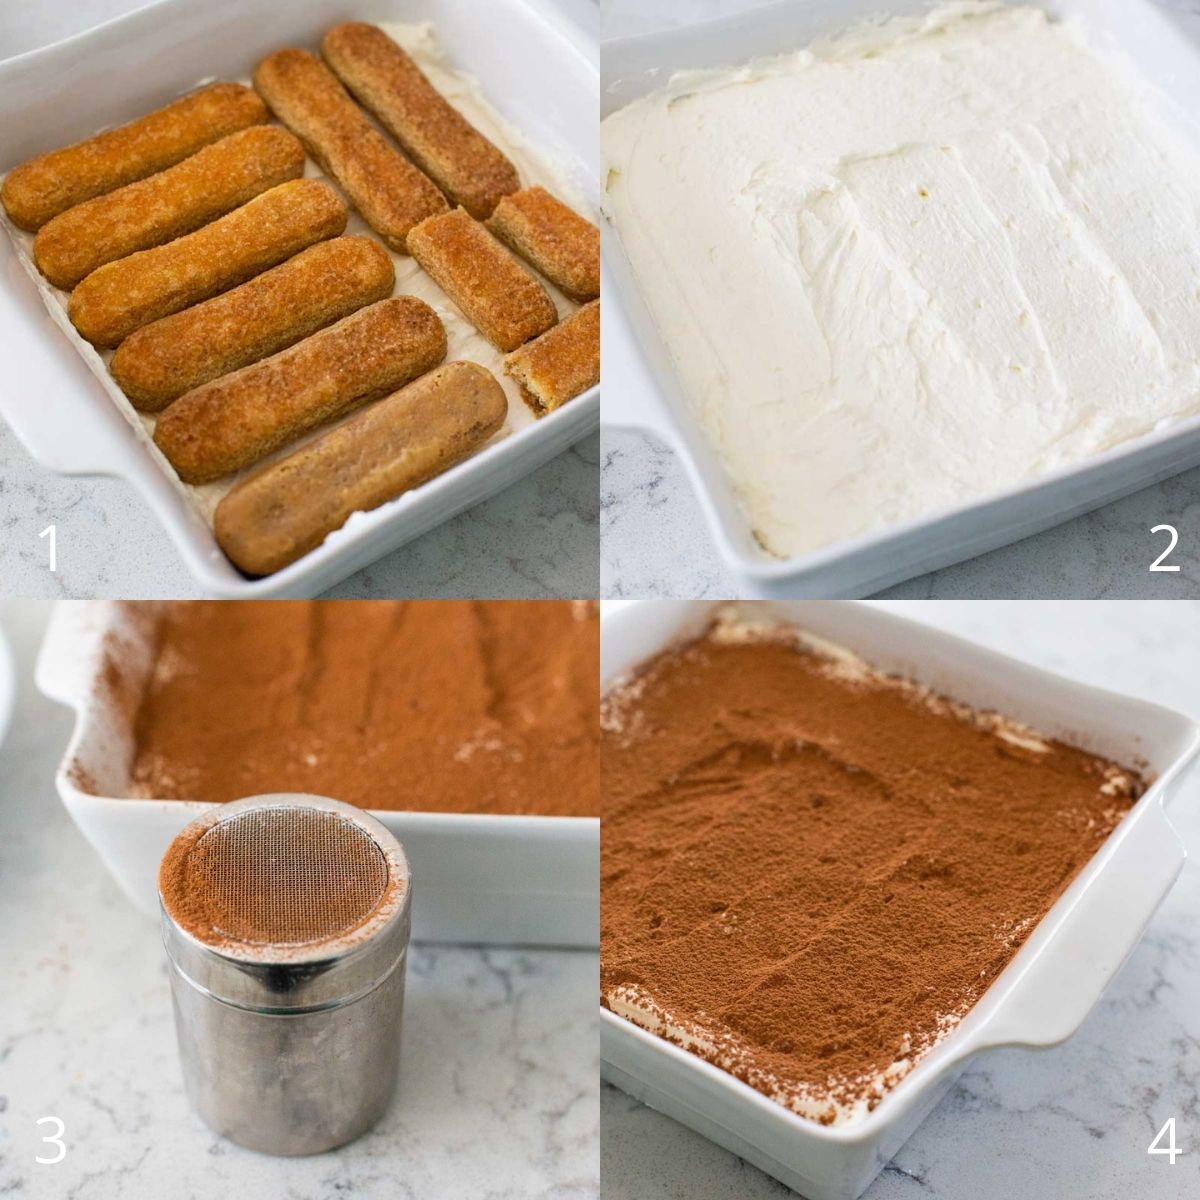 The step by step photo collage shows how to layer the coffee-soaked cookies with mascarpone cheese layer and top with powdered chocolate.